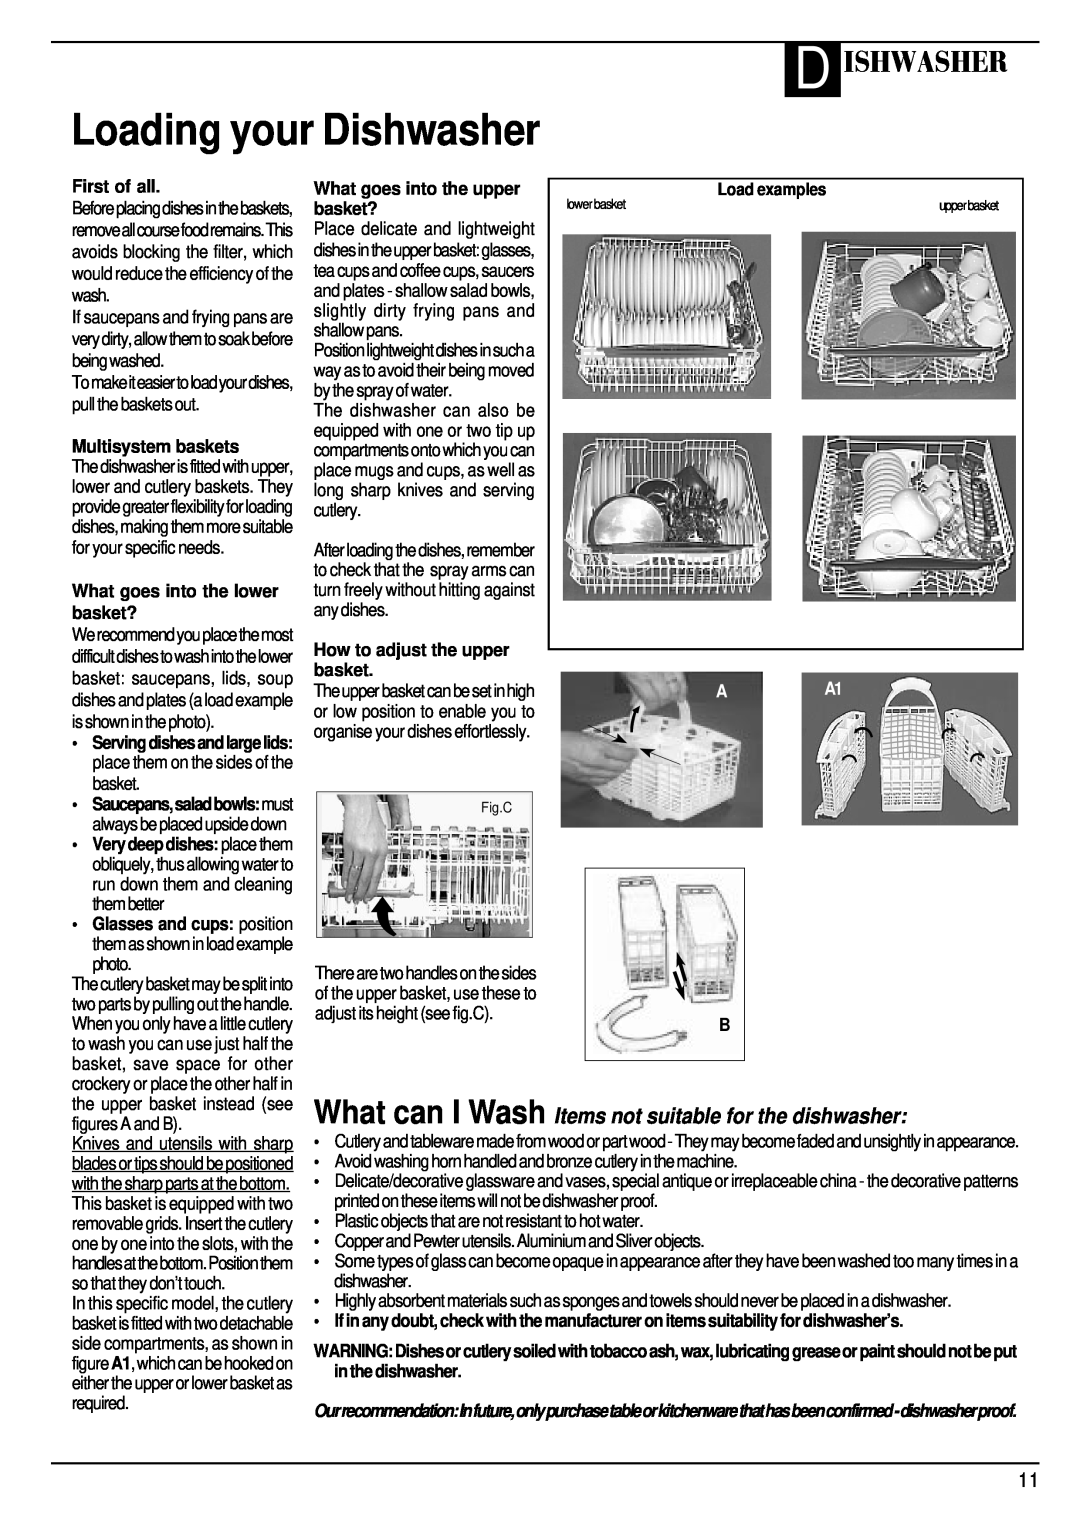 Hotpoint BFZ 700 Loading your Dishwasher, D Ishwasher, What can I Wash Items not suitable for the dishwasher, First of all 